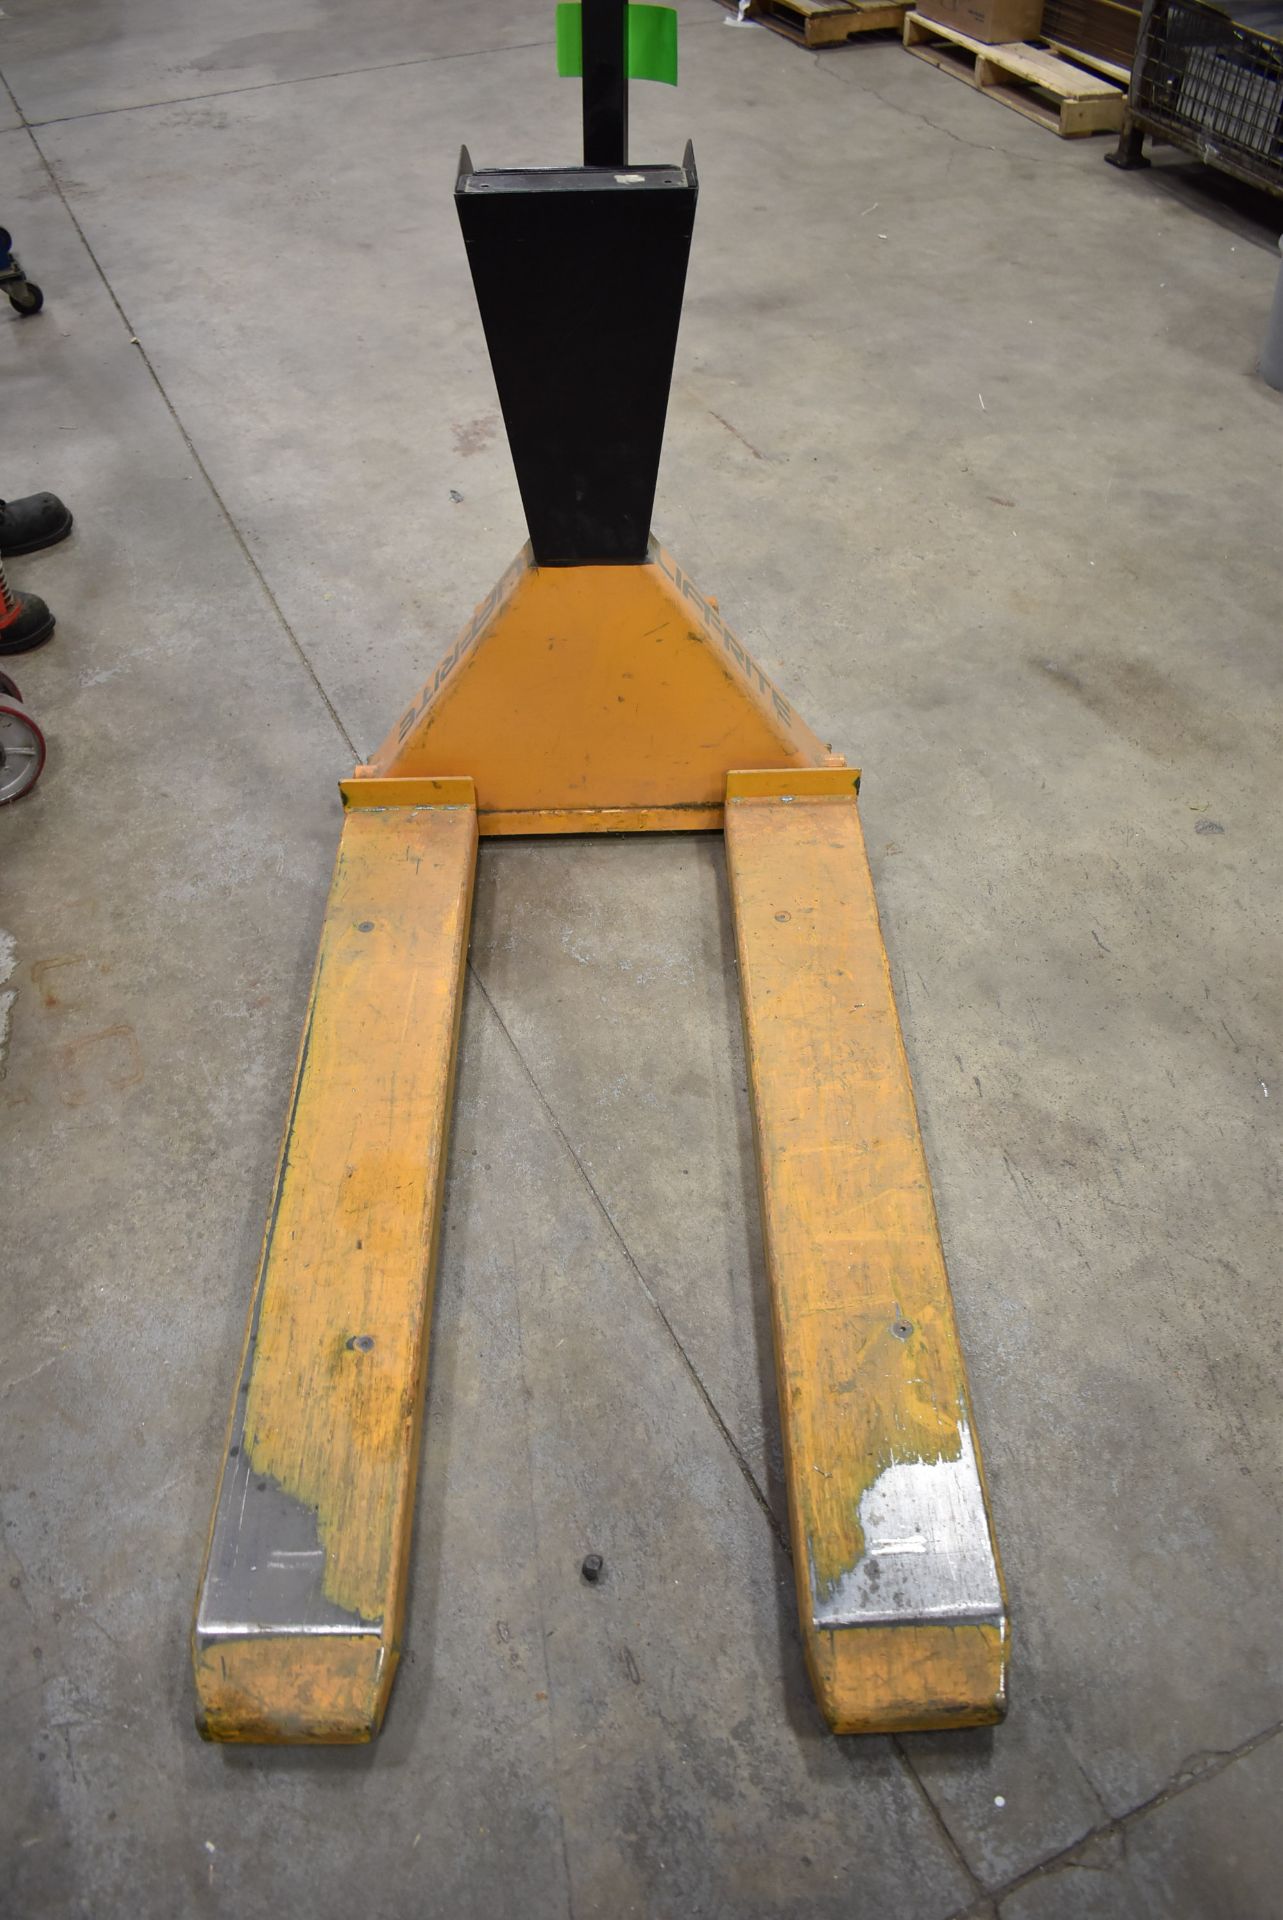 HYDRAULIC PALLET JACK WITH DIGITAL SCALE, S/N: N/A - Image 3 of 4